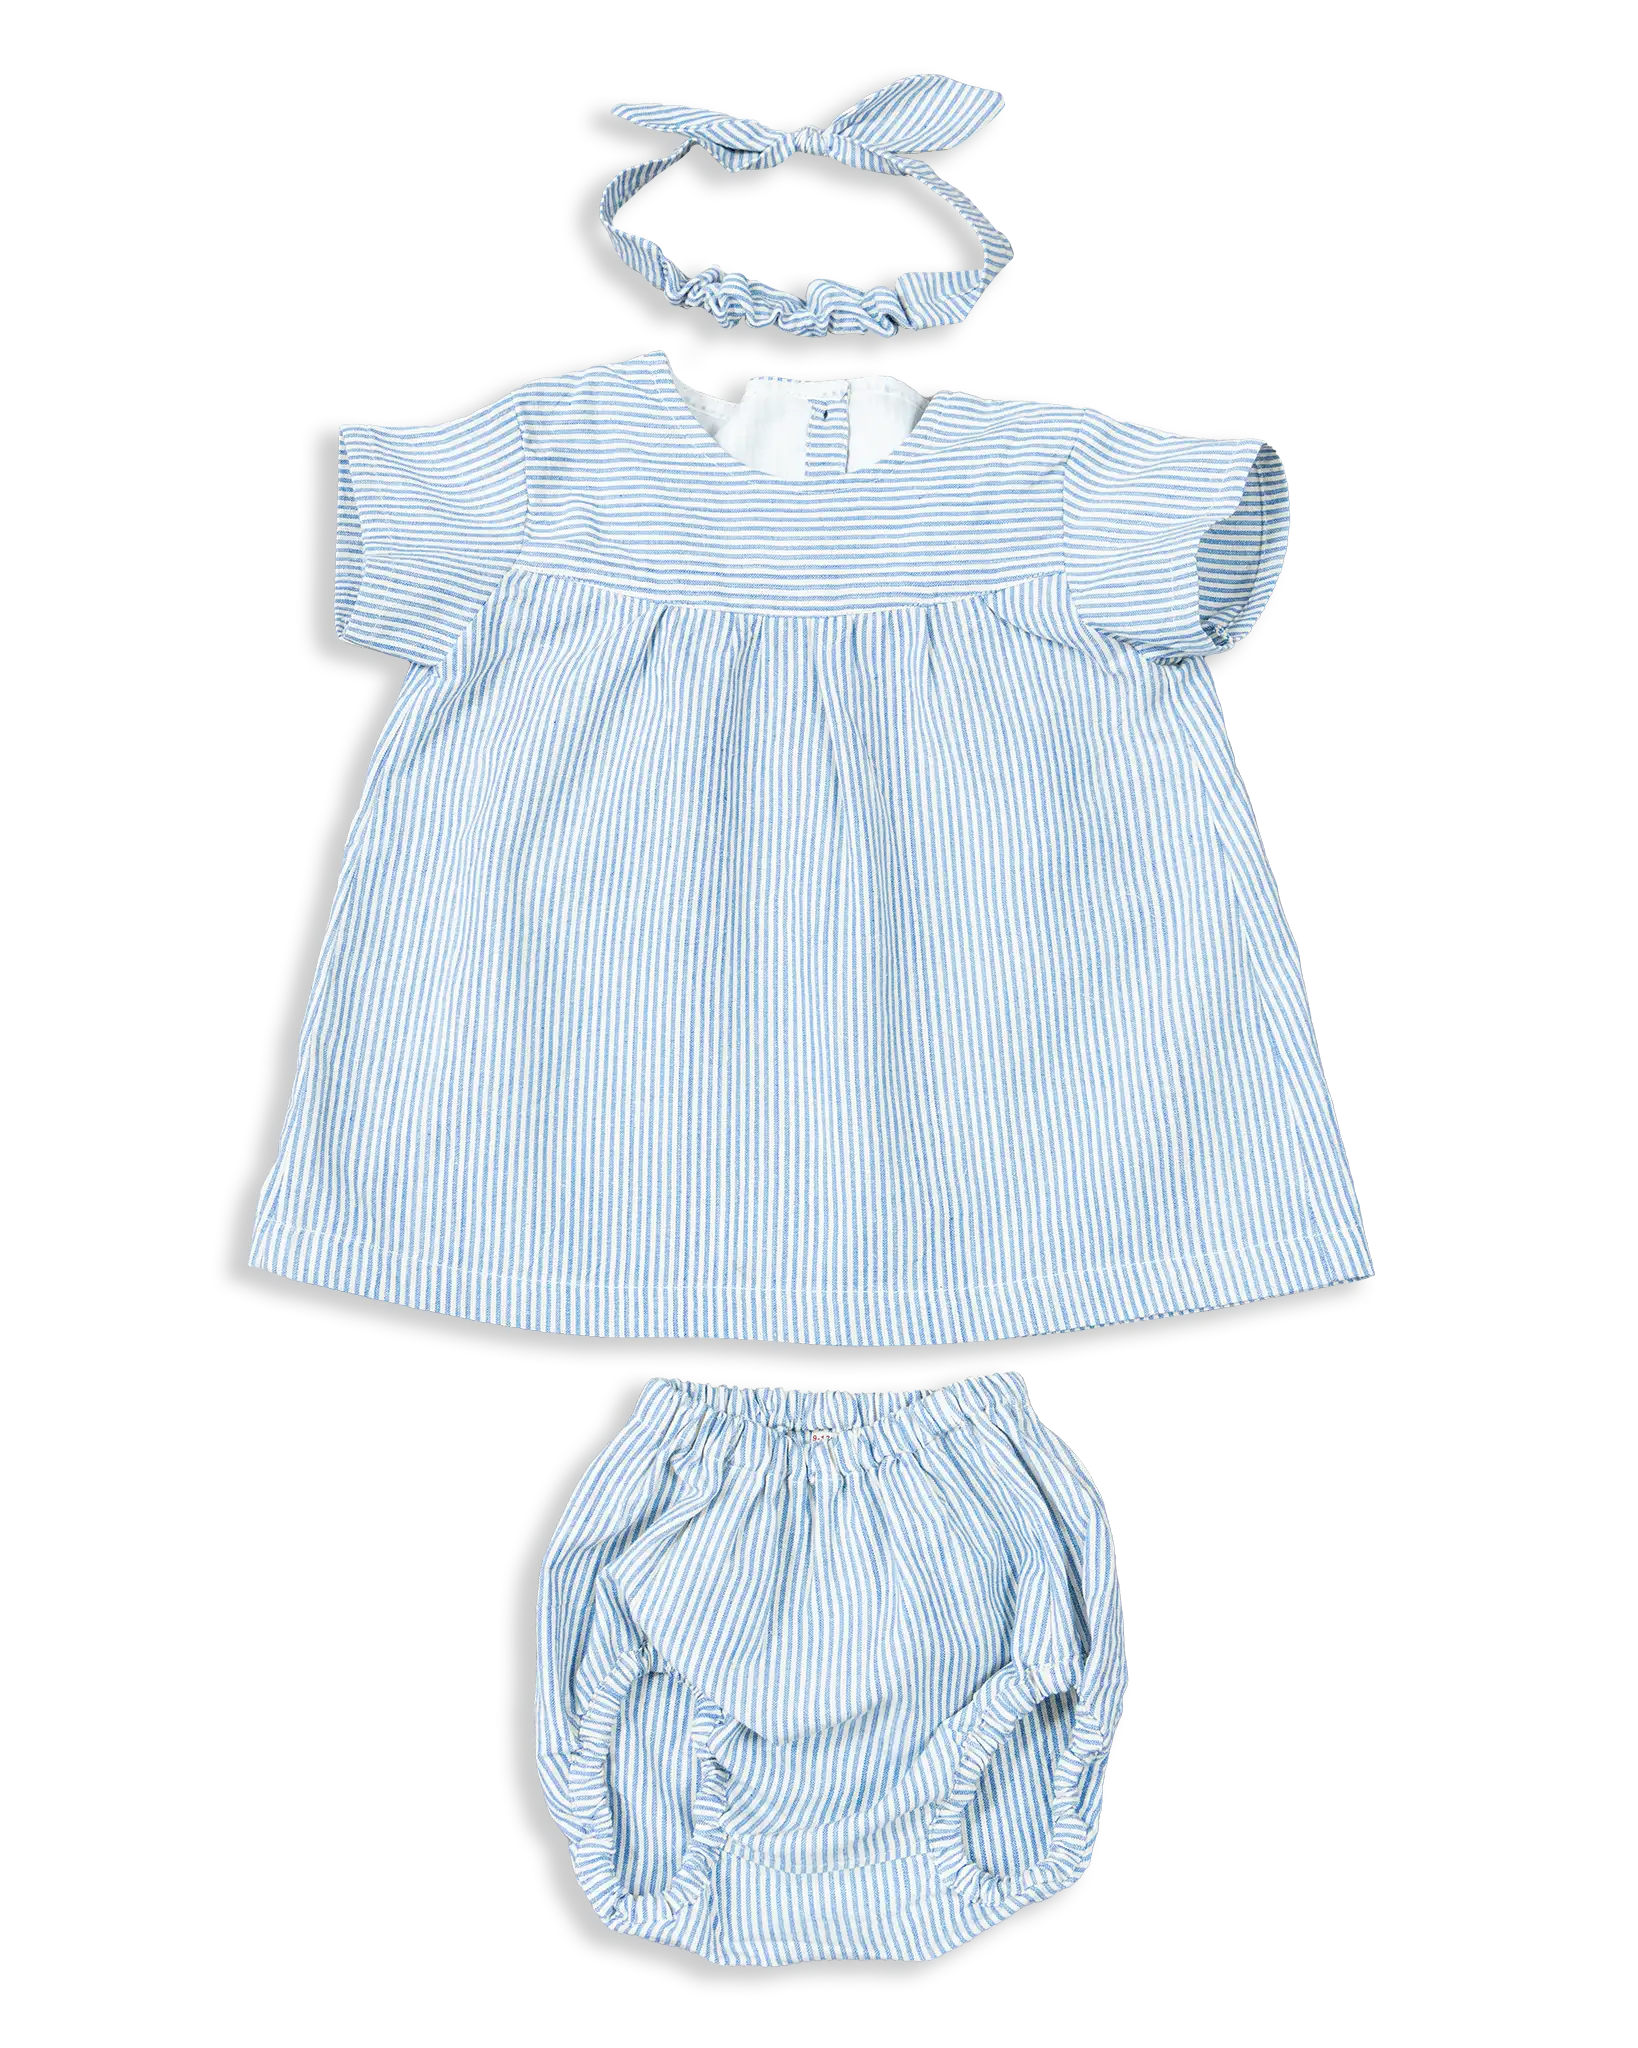 Kokroma Dress Set includes dress, bloomer, and headband. Easy to wear and very comfy design.